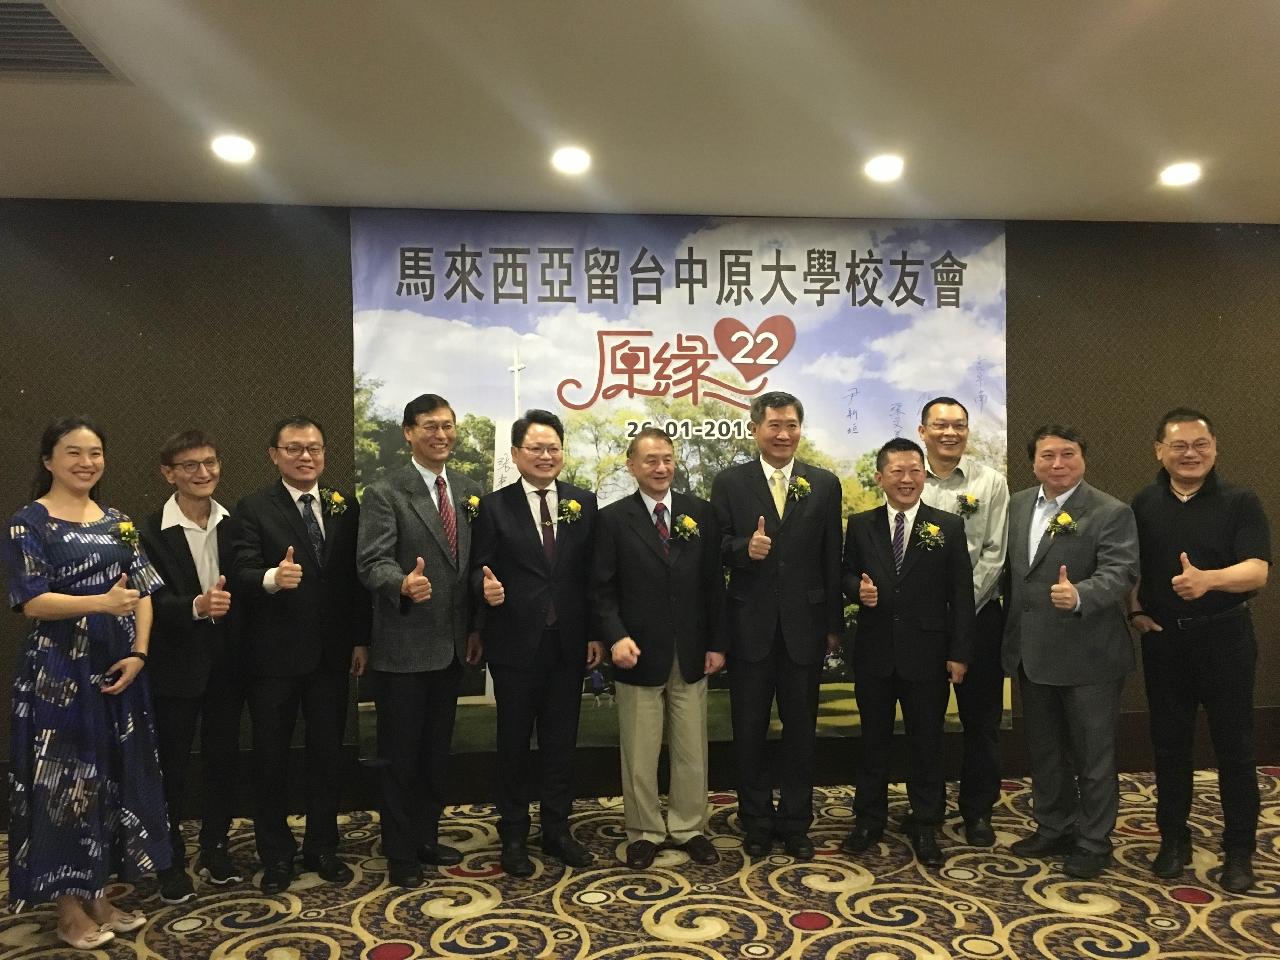 Deputy Representative Michael S.Y.Yiin (fifth from right) takes group photo with VIPs attending anniversary dinner hosted by Chung Yuan University (Taiwan) Alumni Association Malaysia.
